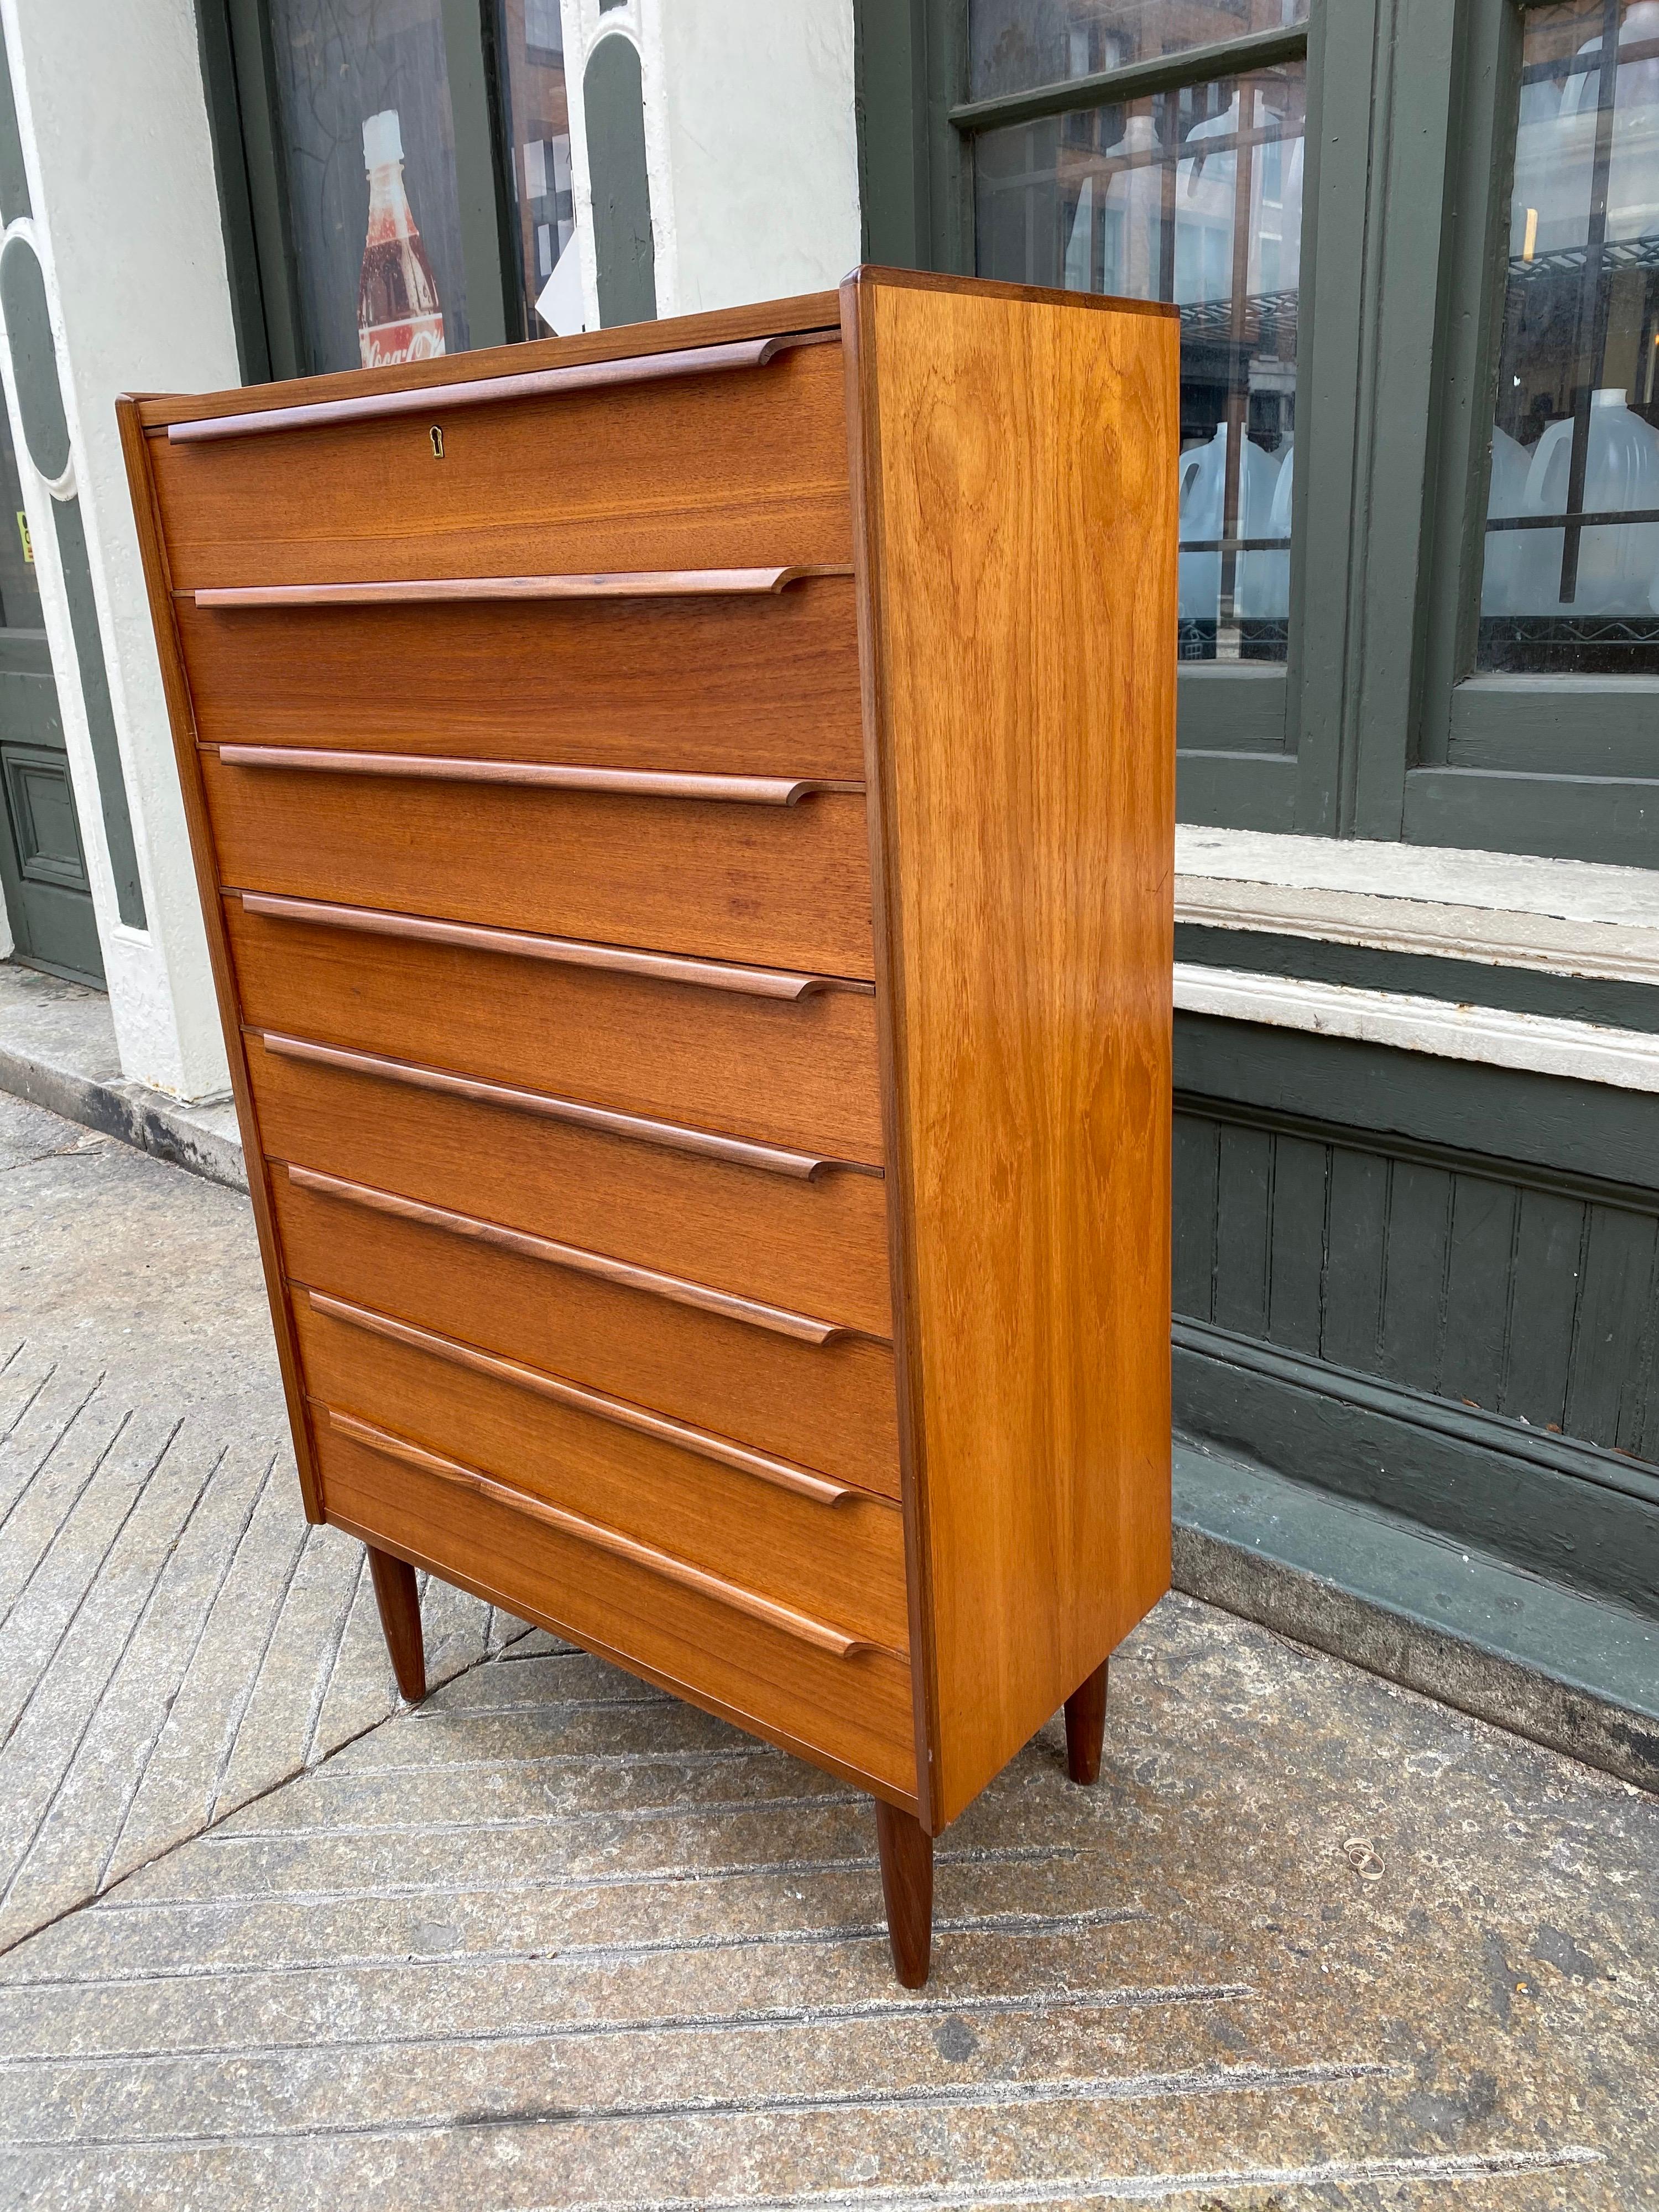 Unique and extra tall Danish teak tall boy dresser. Dresser is exceptionally clean and all original. Inside drawers are in great clean condition as well. Have been selling Danish furniture for many years and this is the first extra tall dresser I